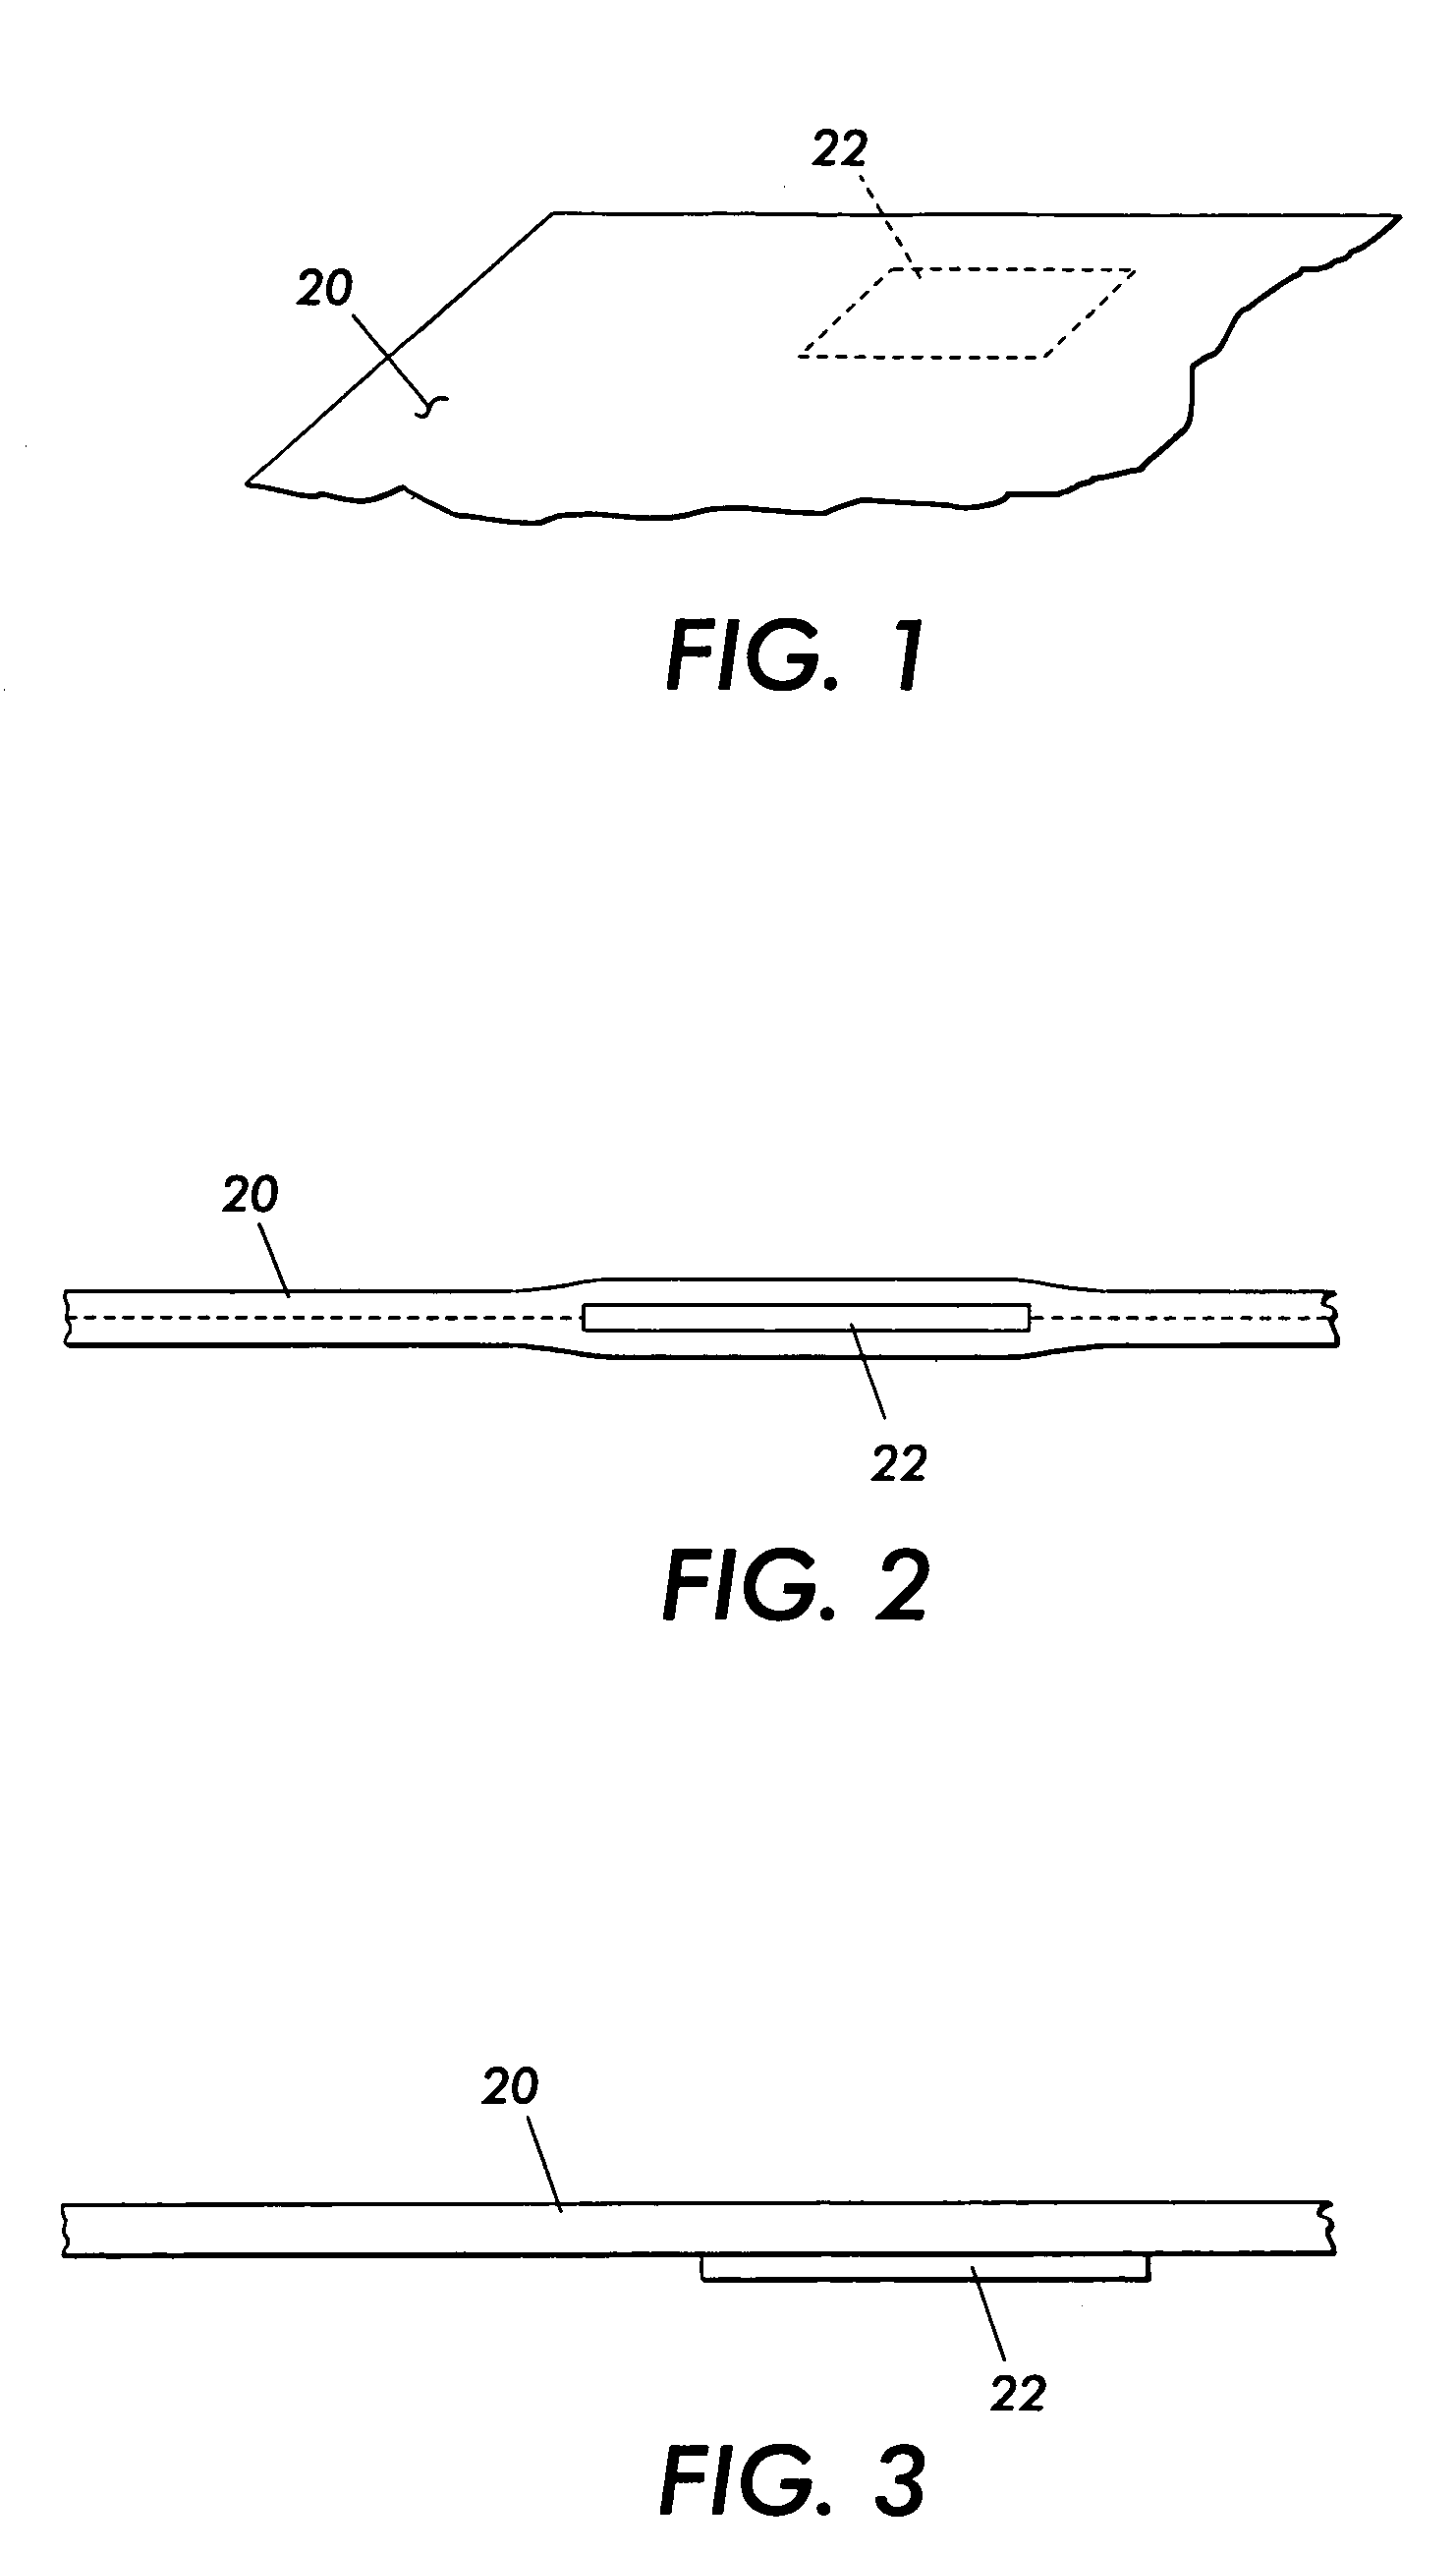 Apparatus for the display of embedded information